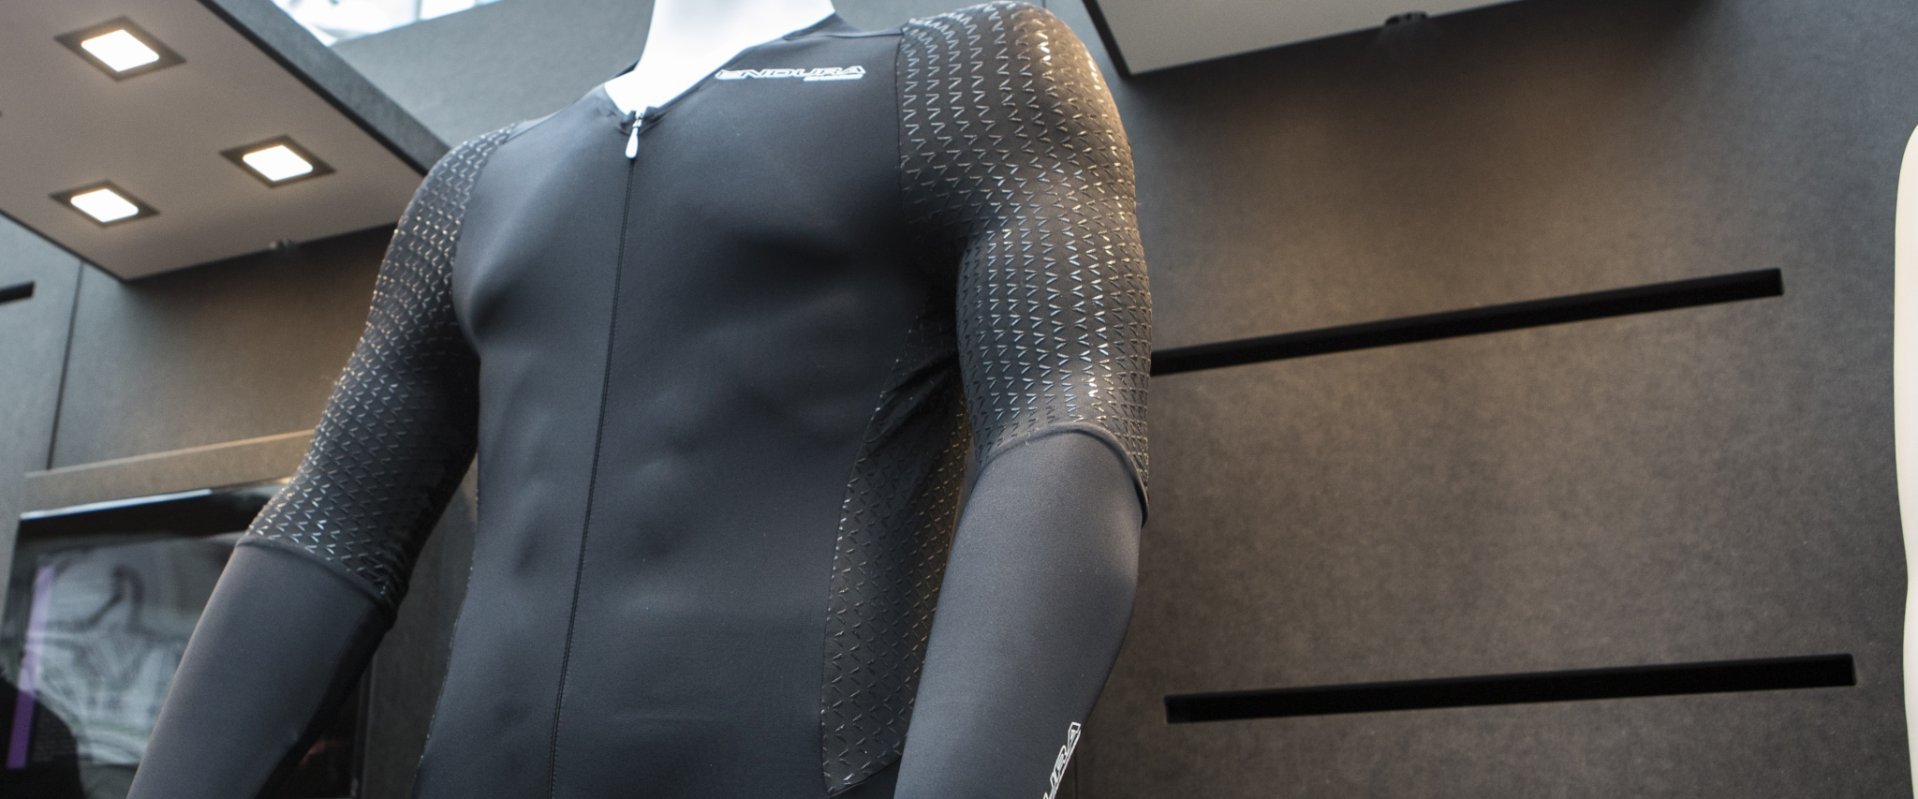 The wind tunnel testing has paid off. The Endura Encapsulator suit has won hour records